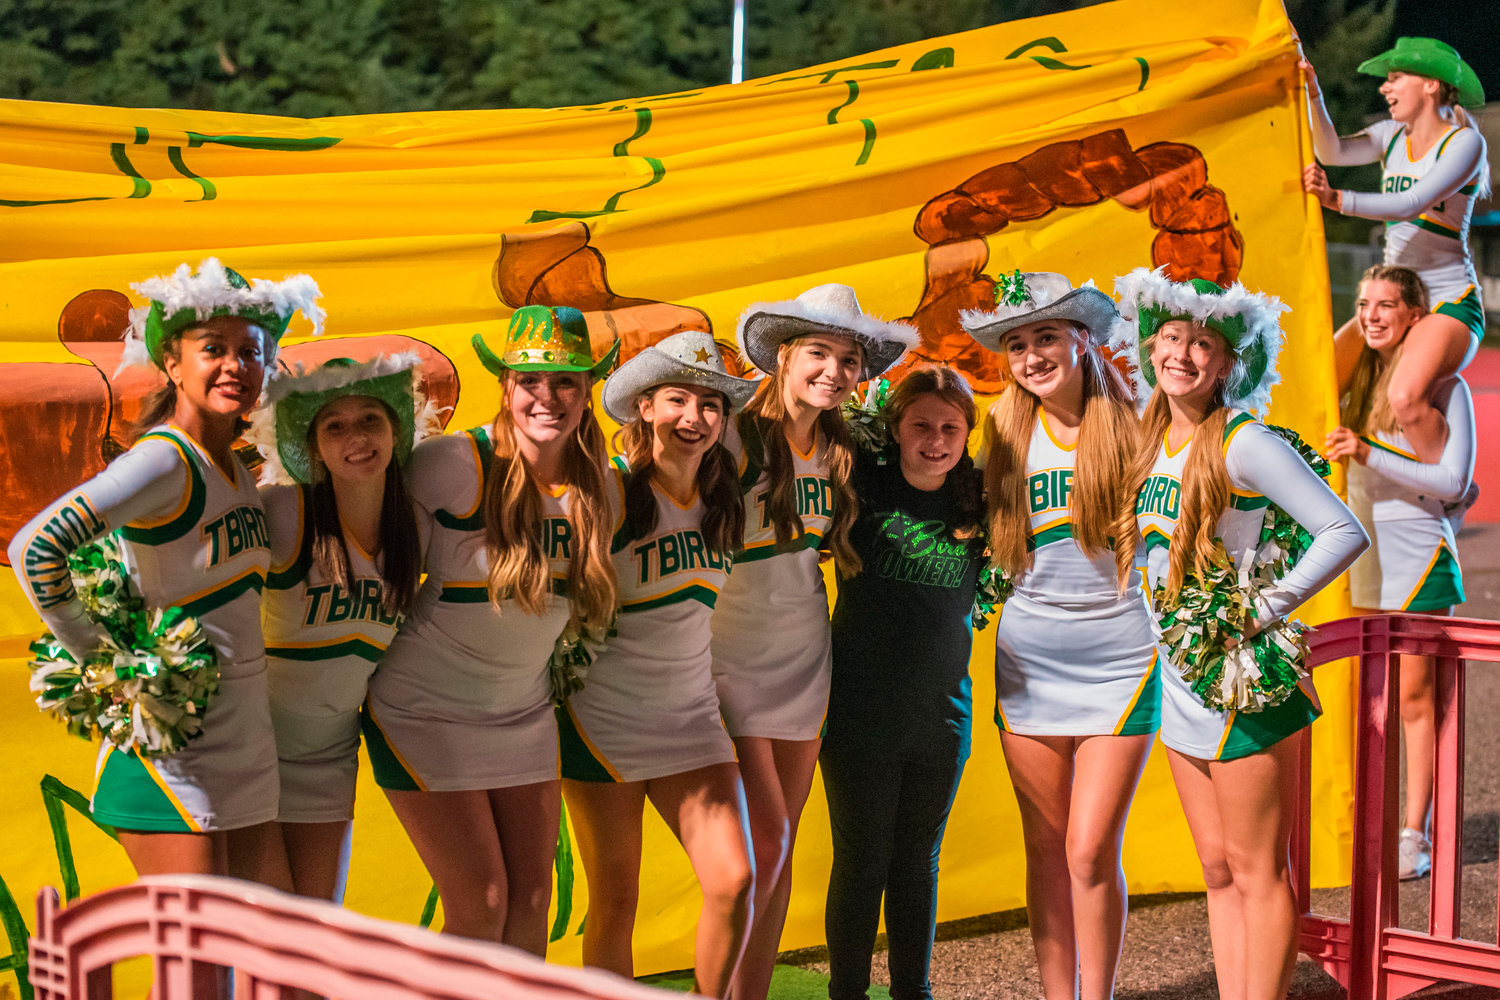 Tumwater cheerleaders pose for a photo at halftime under Friday night lights.